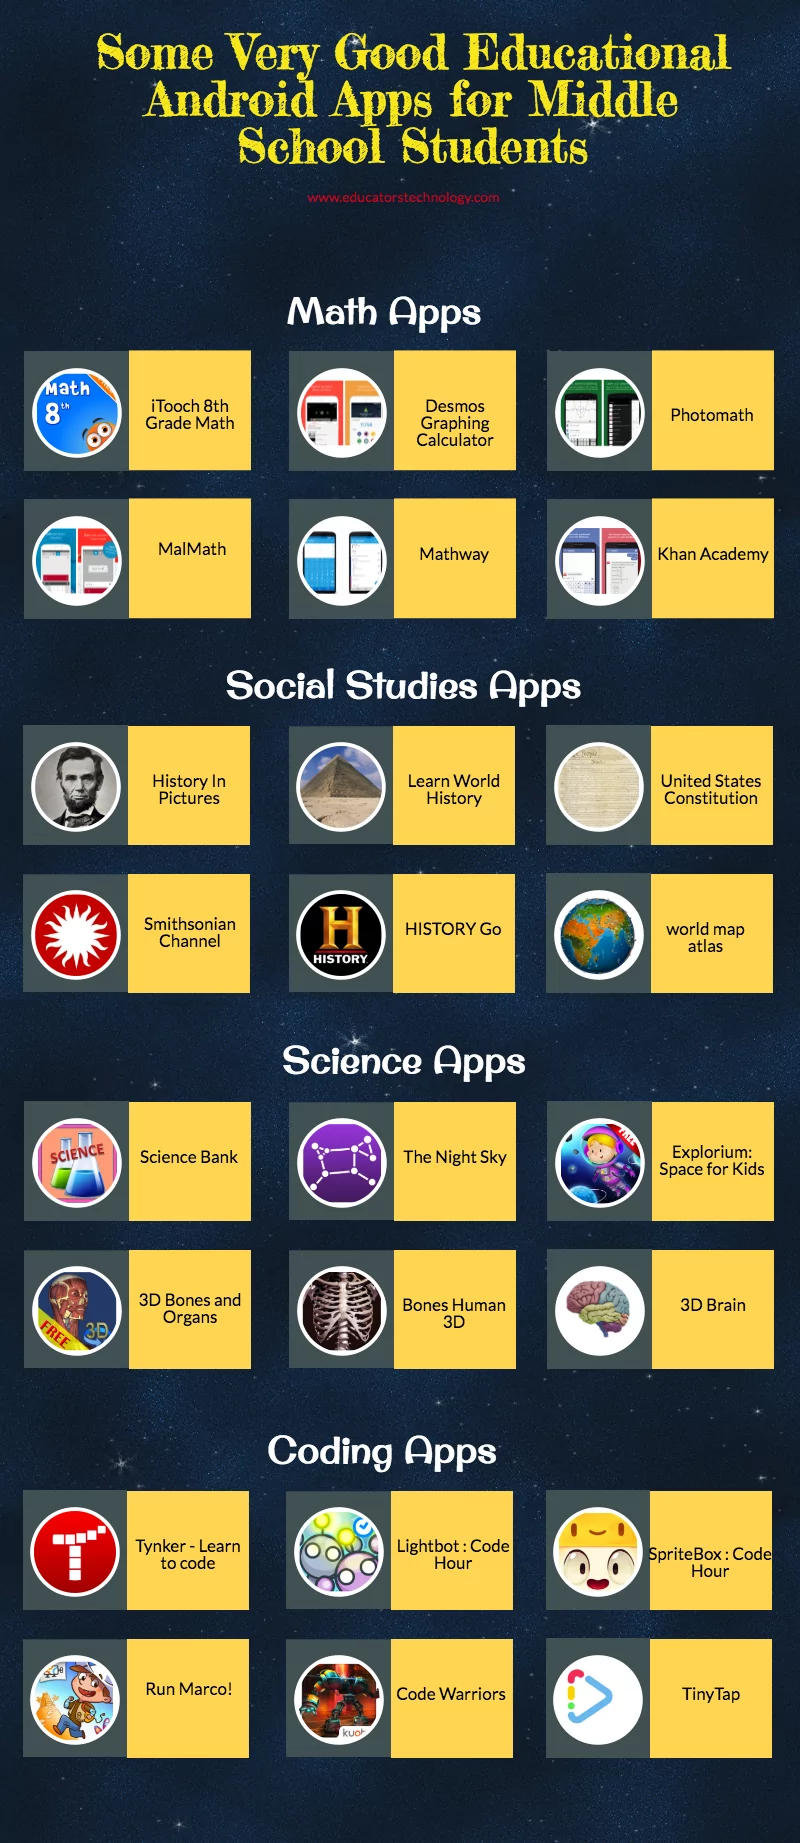 Some Very Good Educational Android Apps for Middle School Students